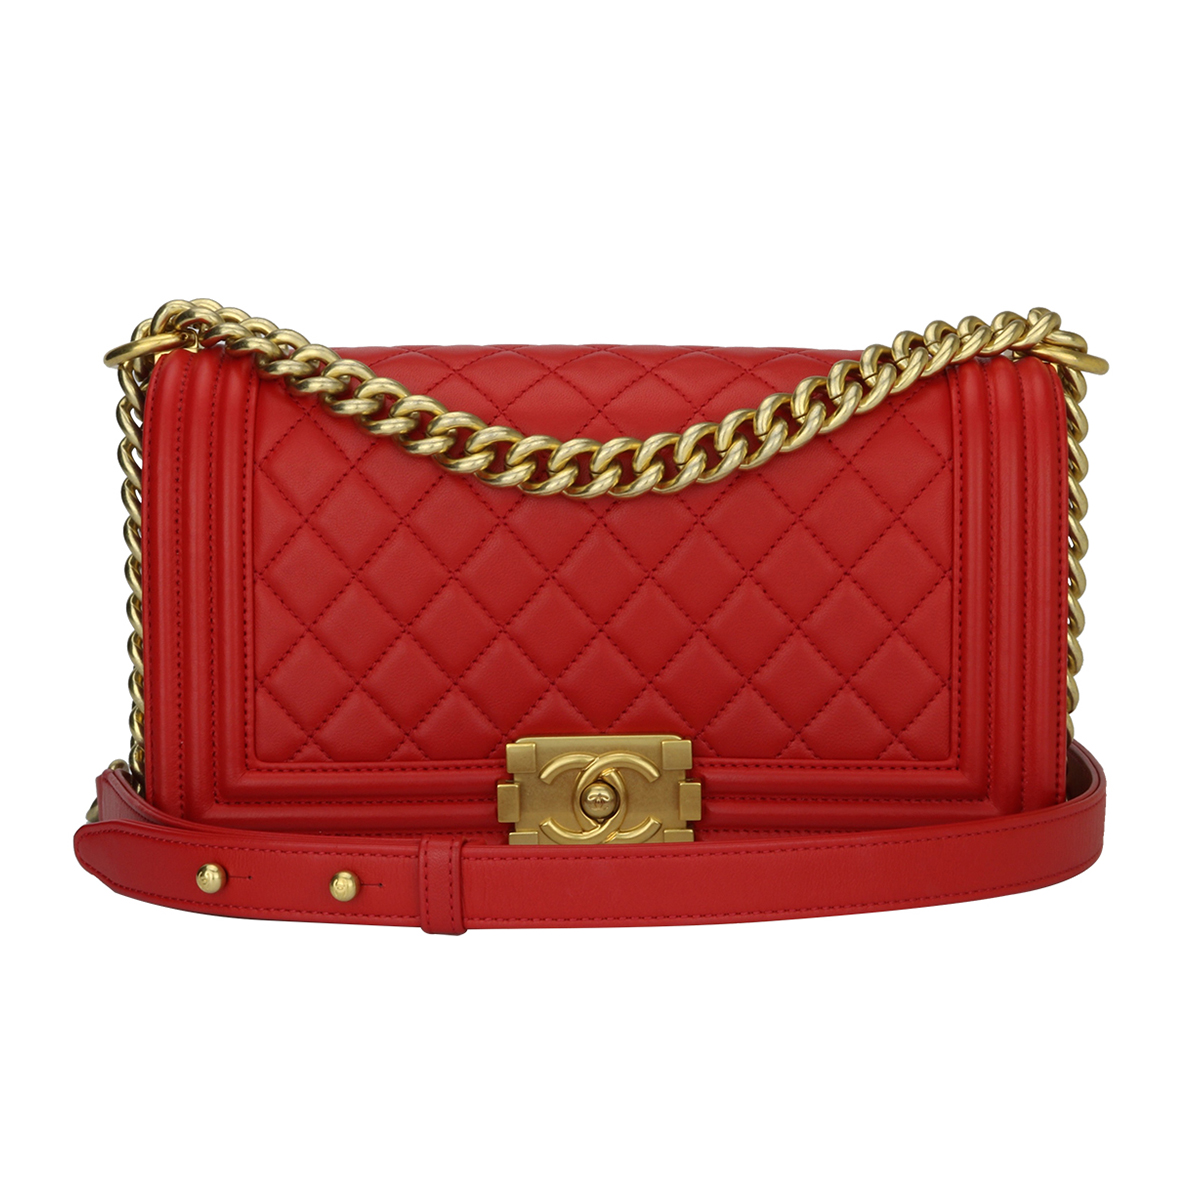 red lambskin chanel bag authentic